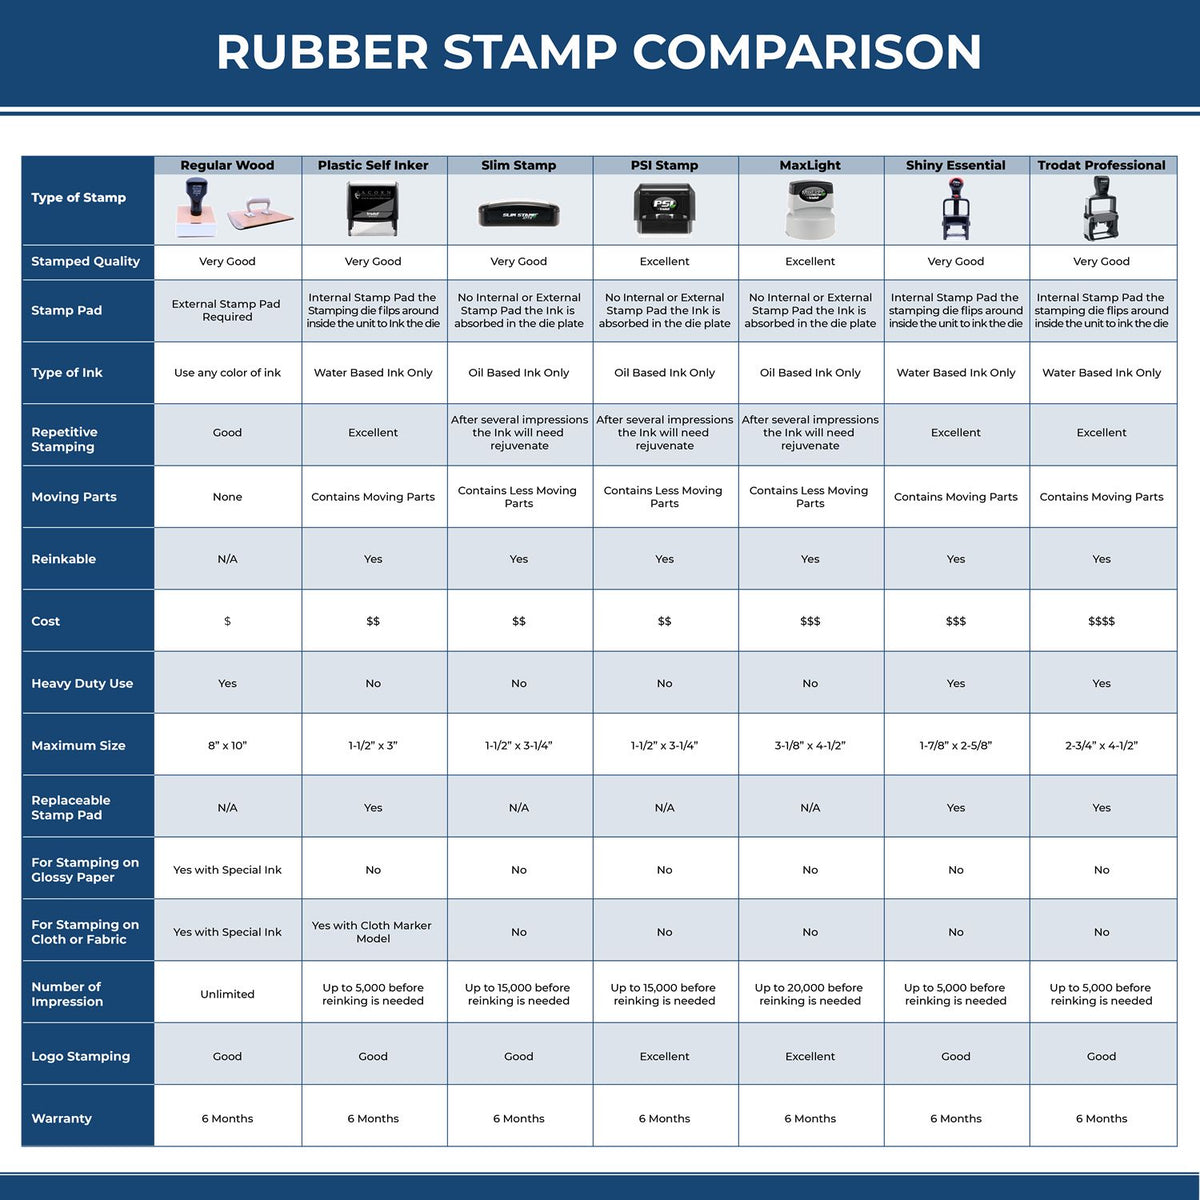 A comparison chart for the different types of mount models available for the Premium MaxLight Pre-Inked Virginia Landscape Architectural Stamp.